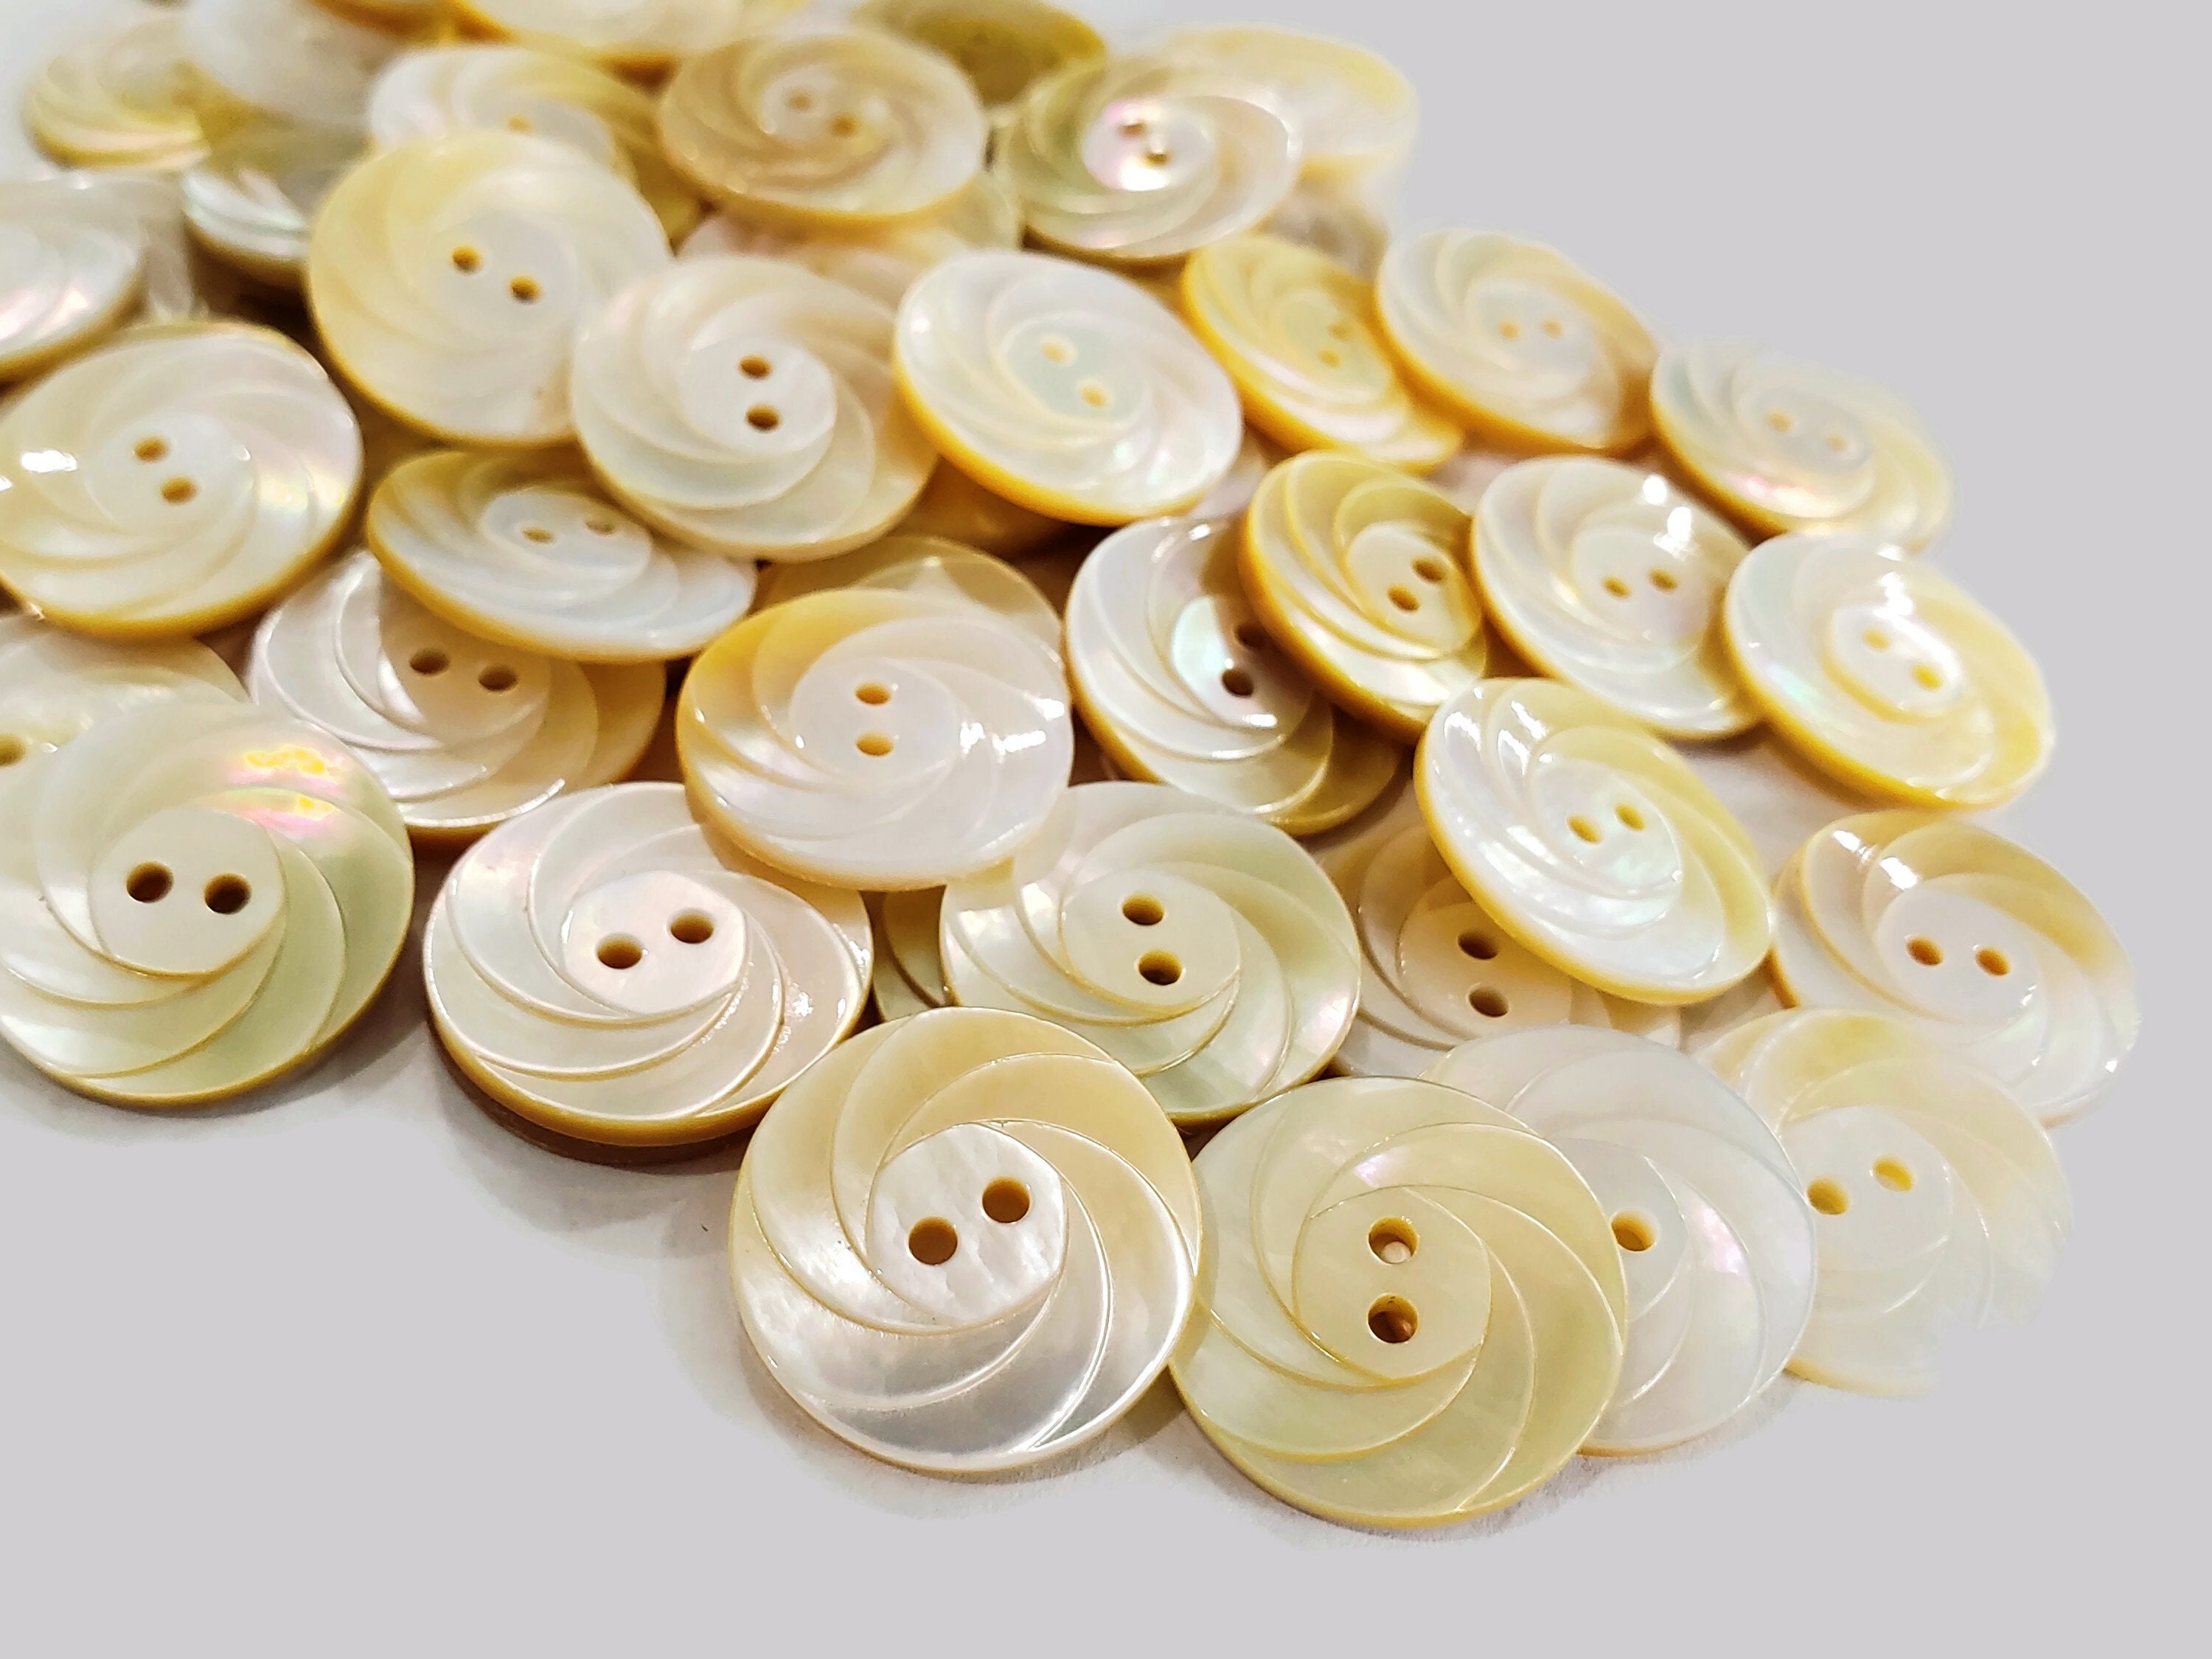 Vintage Antique Small White Mother of Pearl 4 Hole Buttons 3/8-7